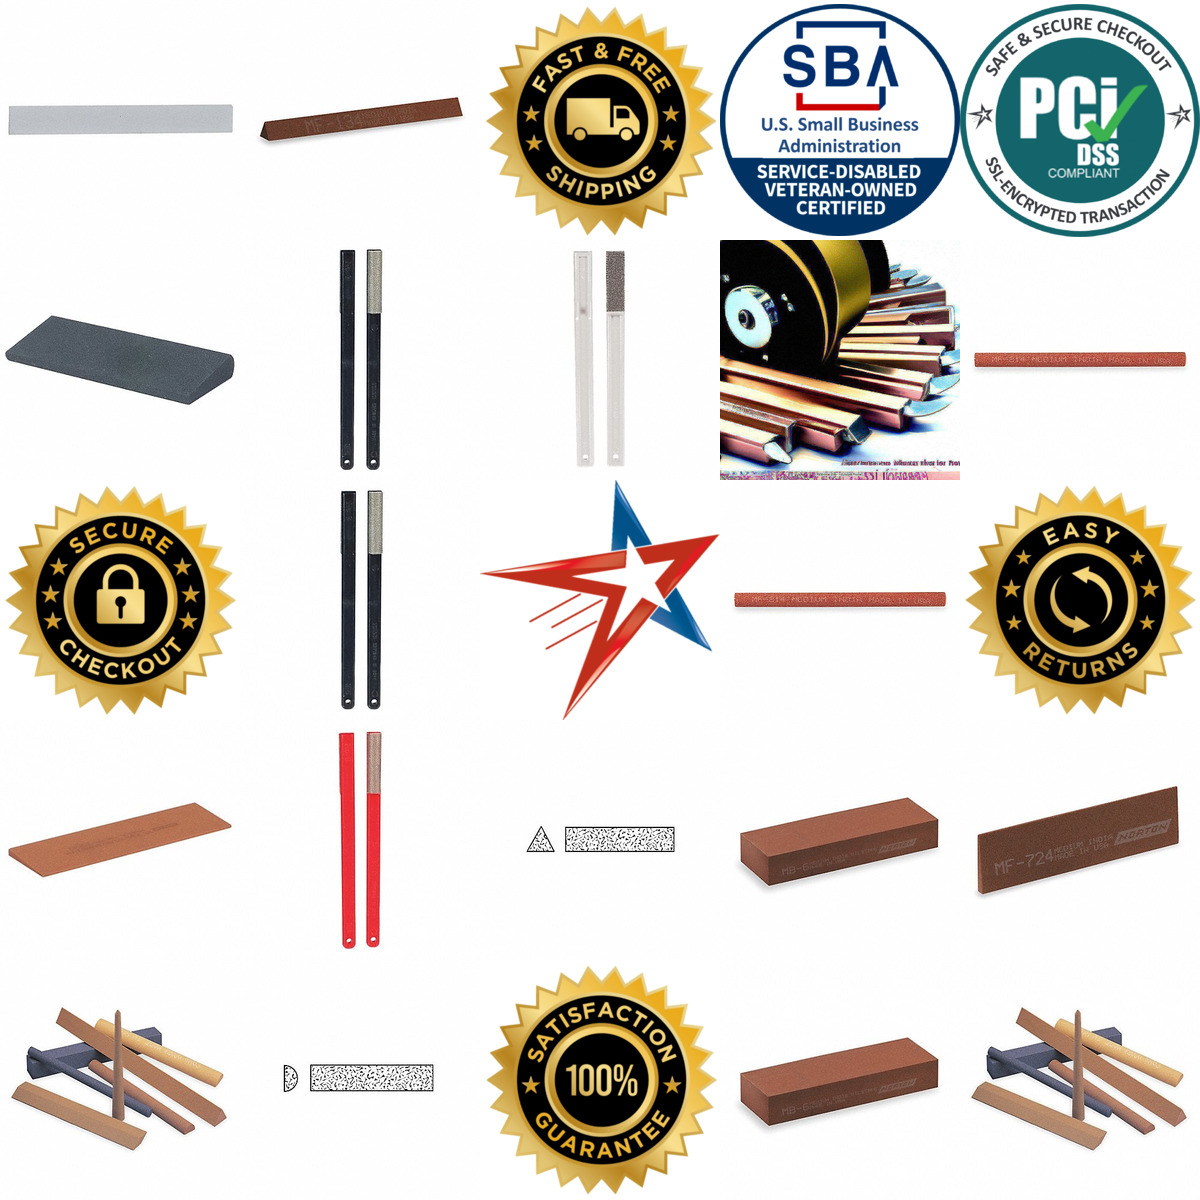 A selection of Abrasive Sharpening Files products on GoVets